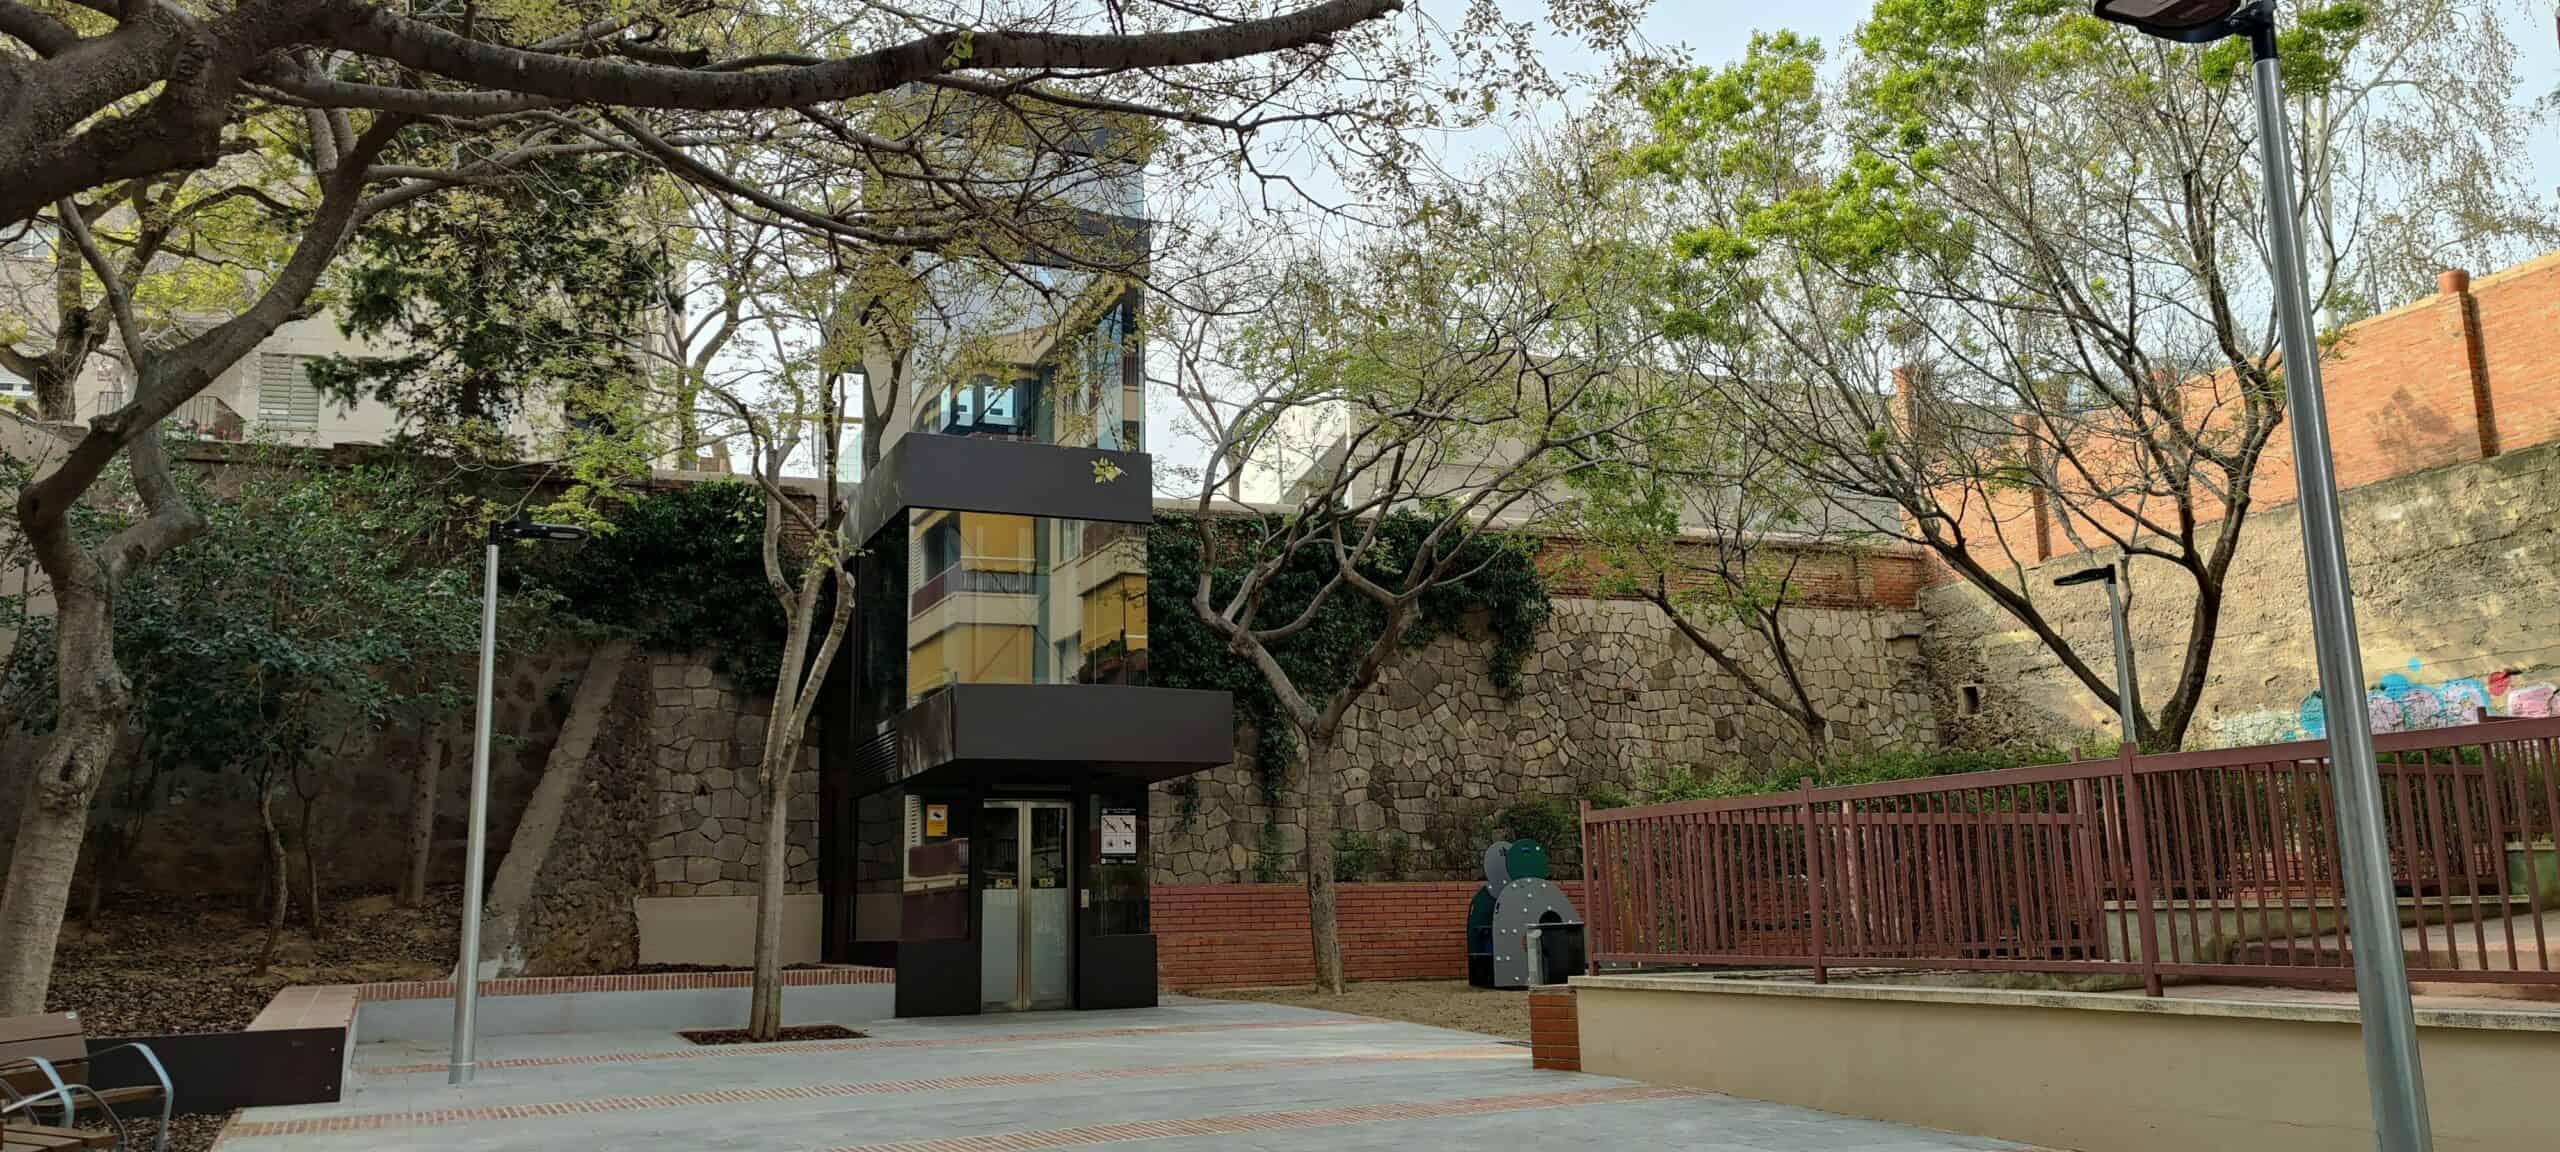 Elevator for Horta neighborhood connects two streets with unevenness